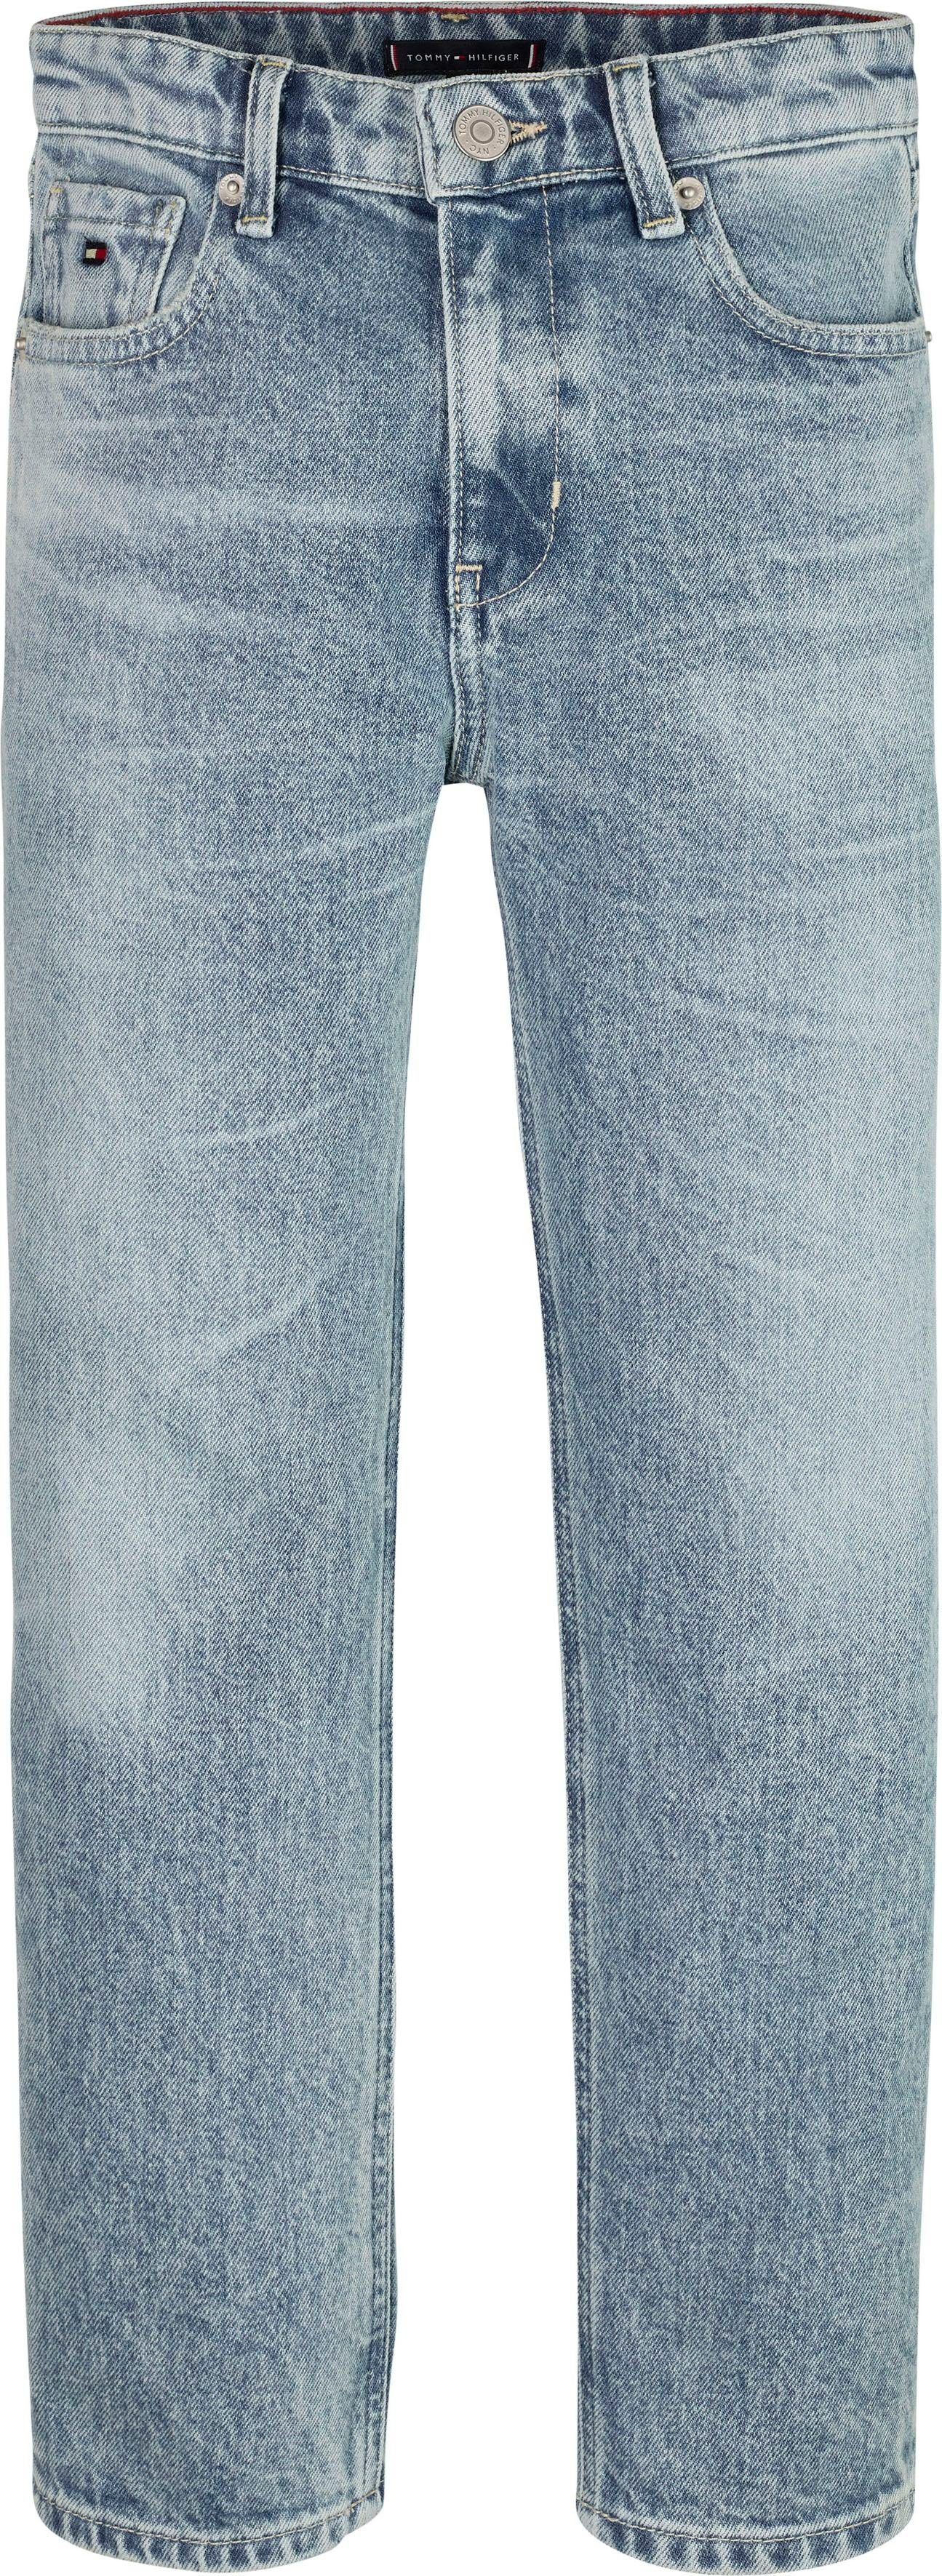 Jeans 5-Pocket-Style im JEAN Tommy Hilfiger Bequeme RECYCLED SKATER